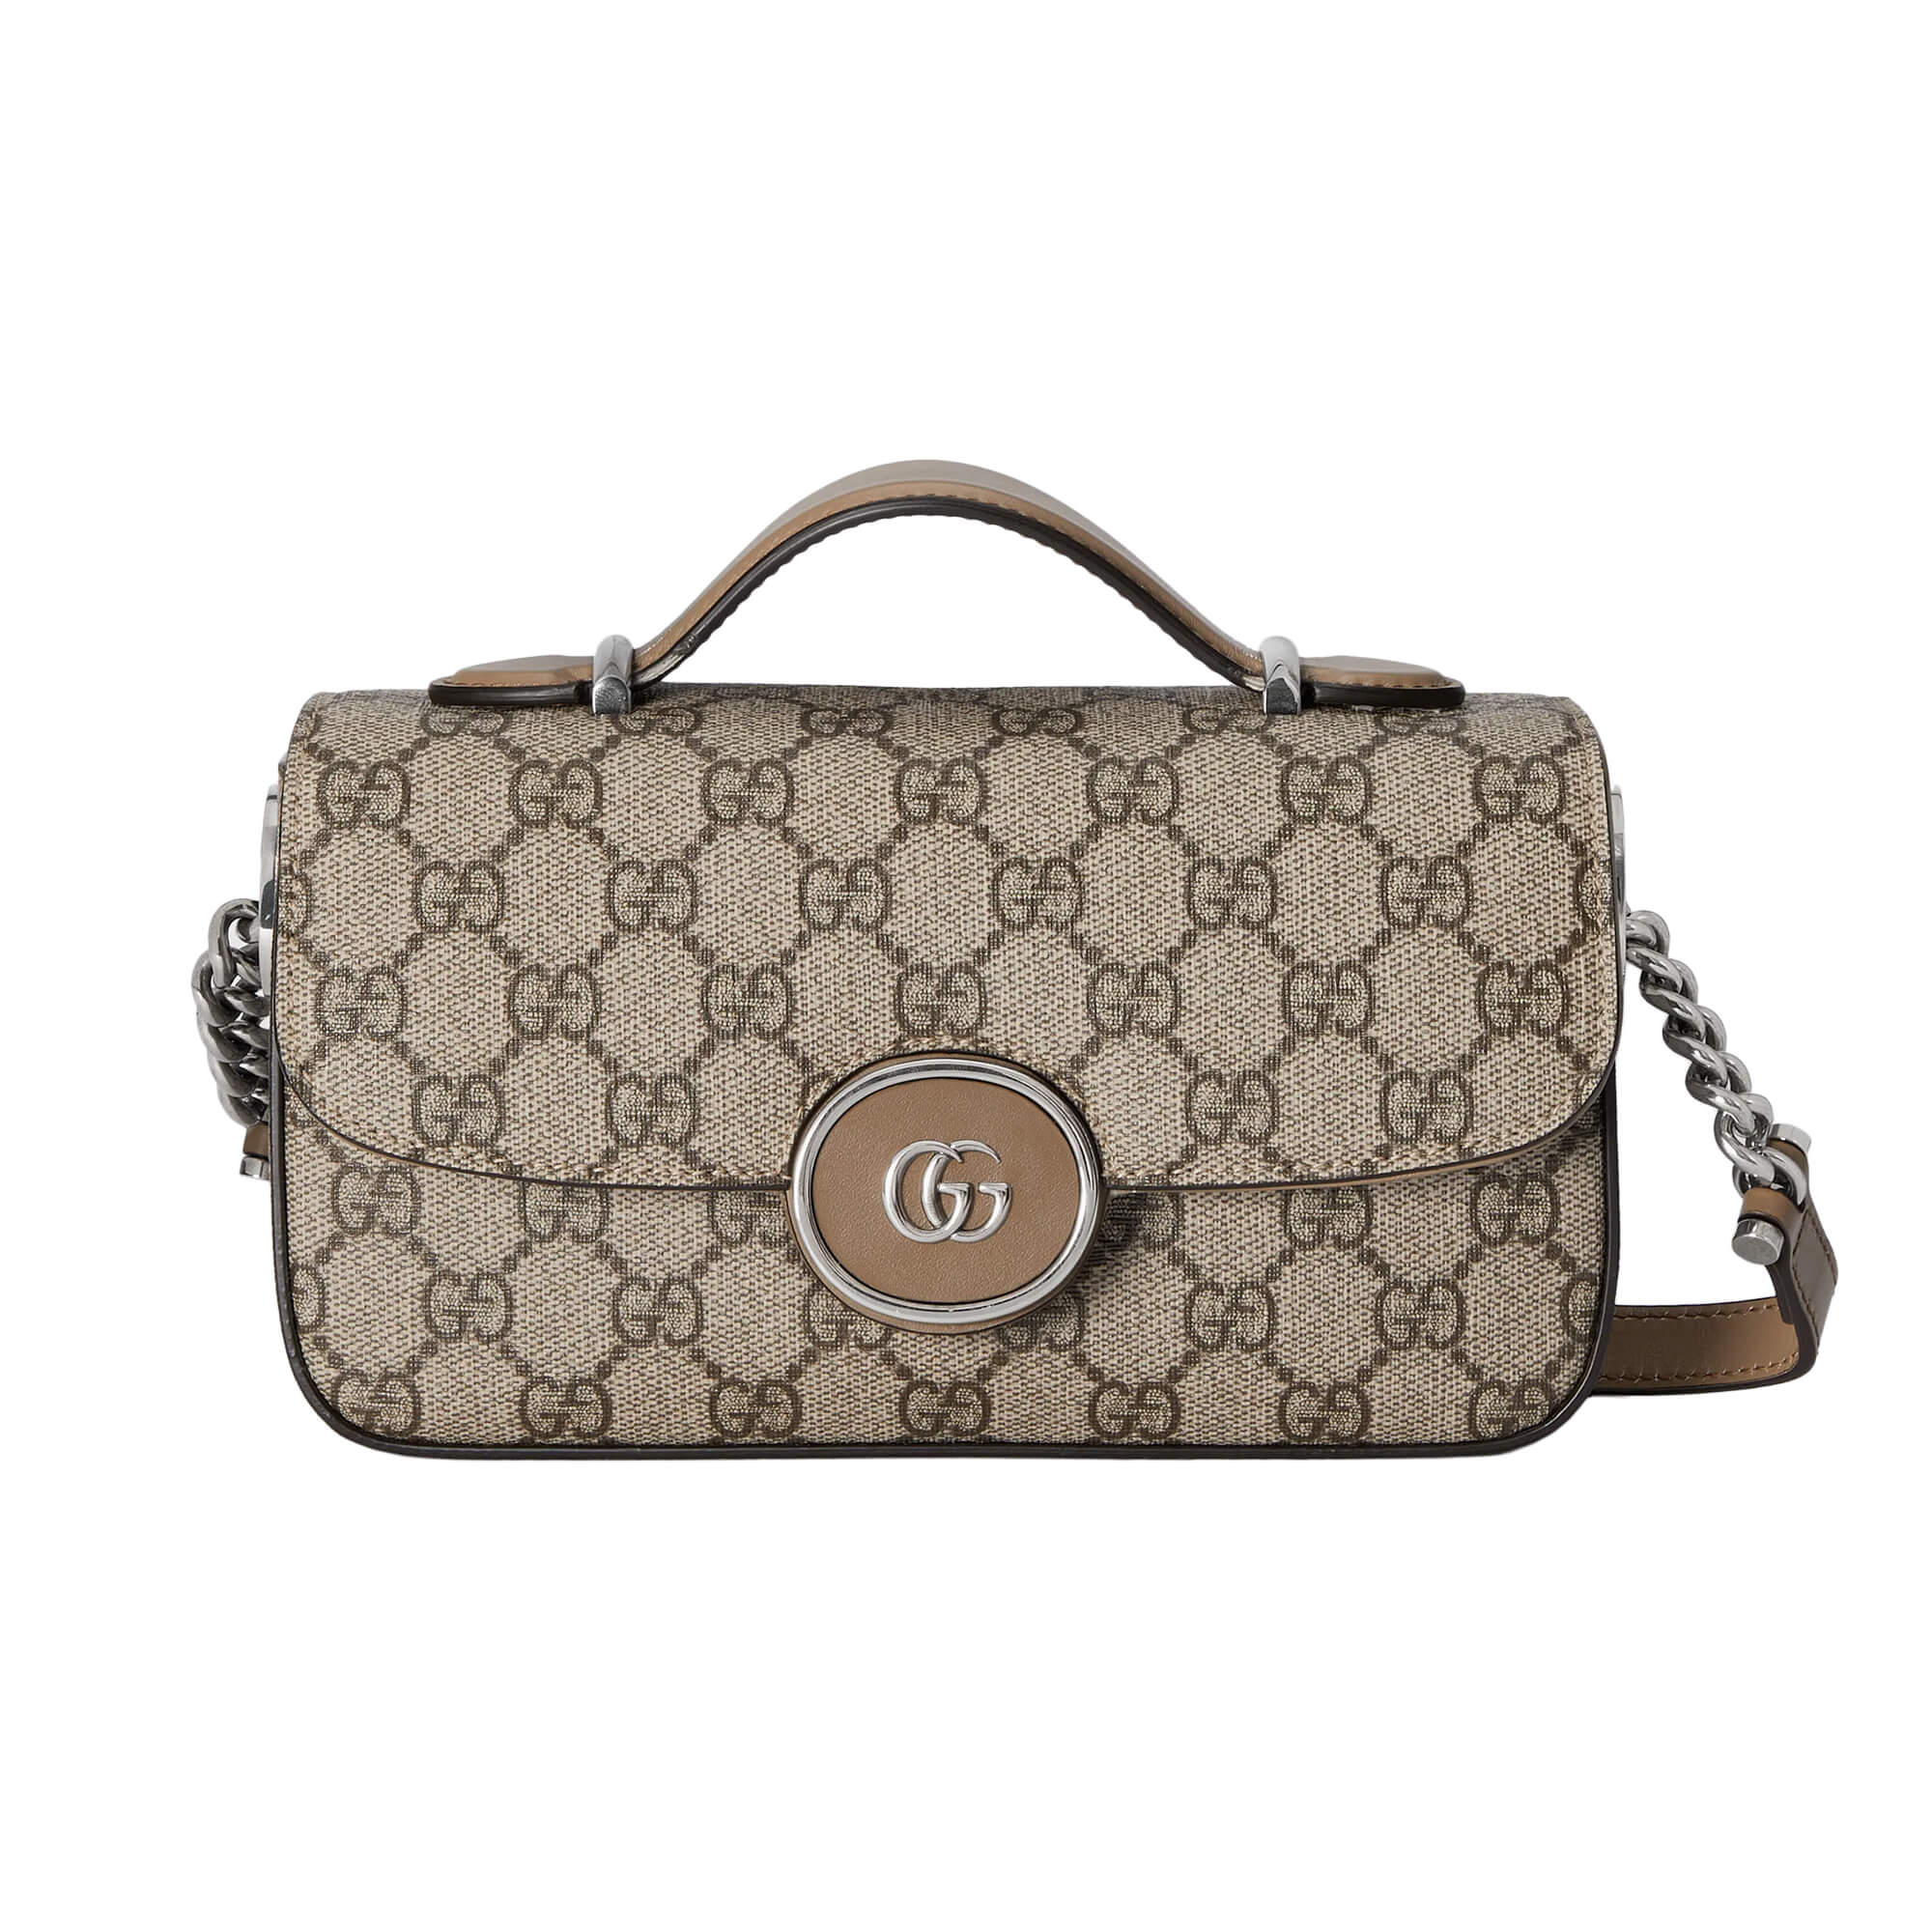 Gucci Supreme Gg Canvas Top Handle Bag In Beige,brown